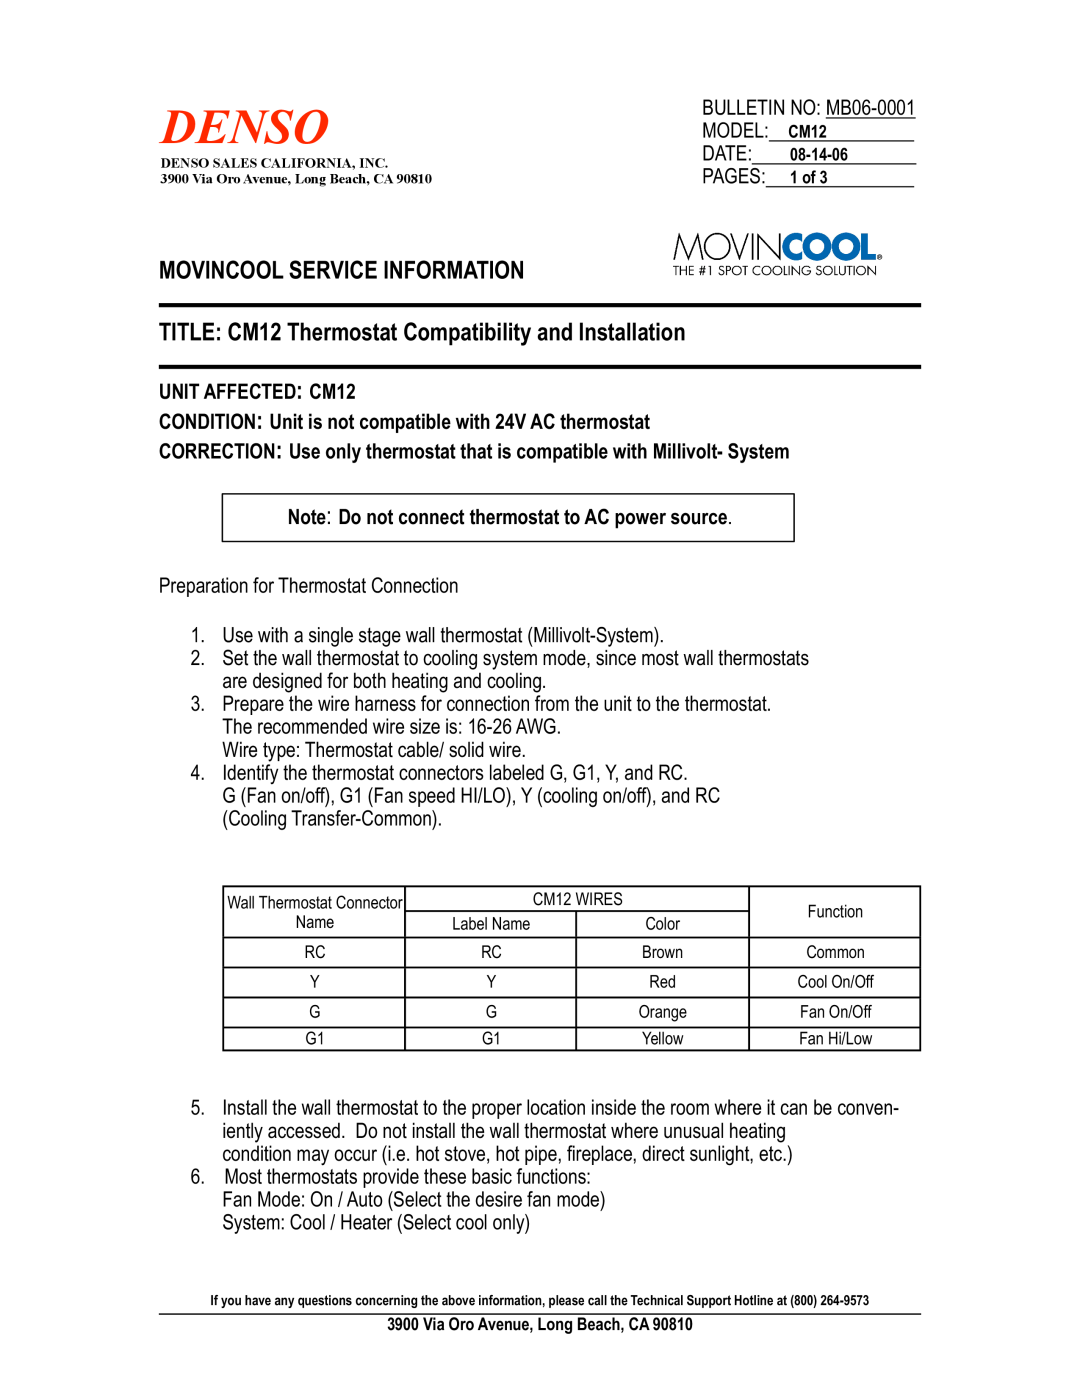 Hunter Fan manual Movincool Service Information, TITLE CM12 Thermostat Compatibility and Installation, Model, Date 